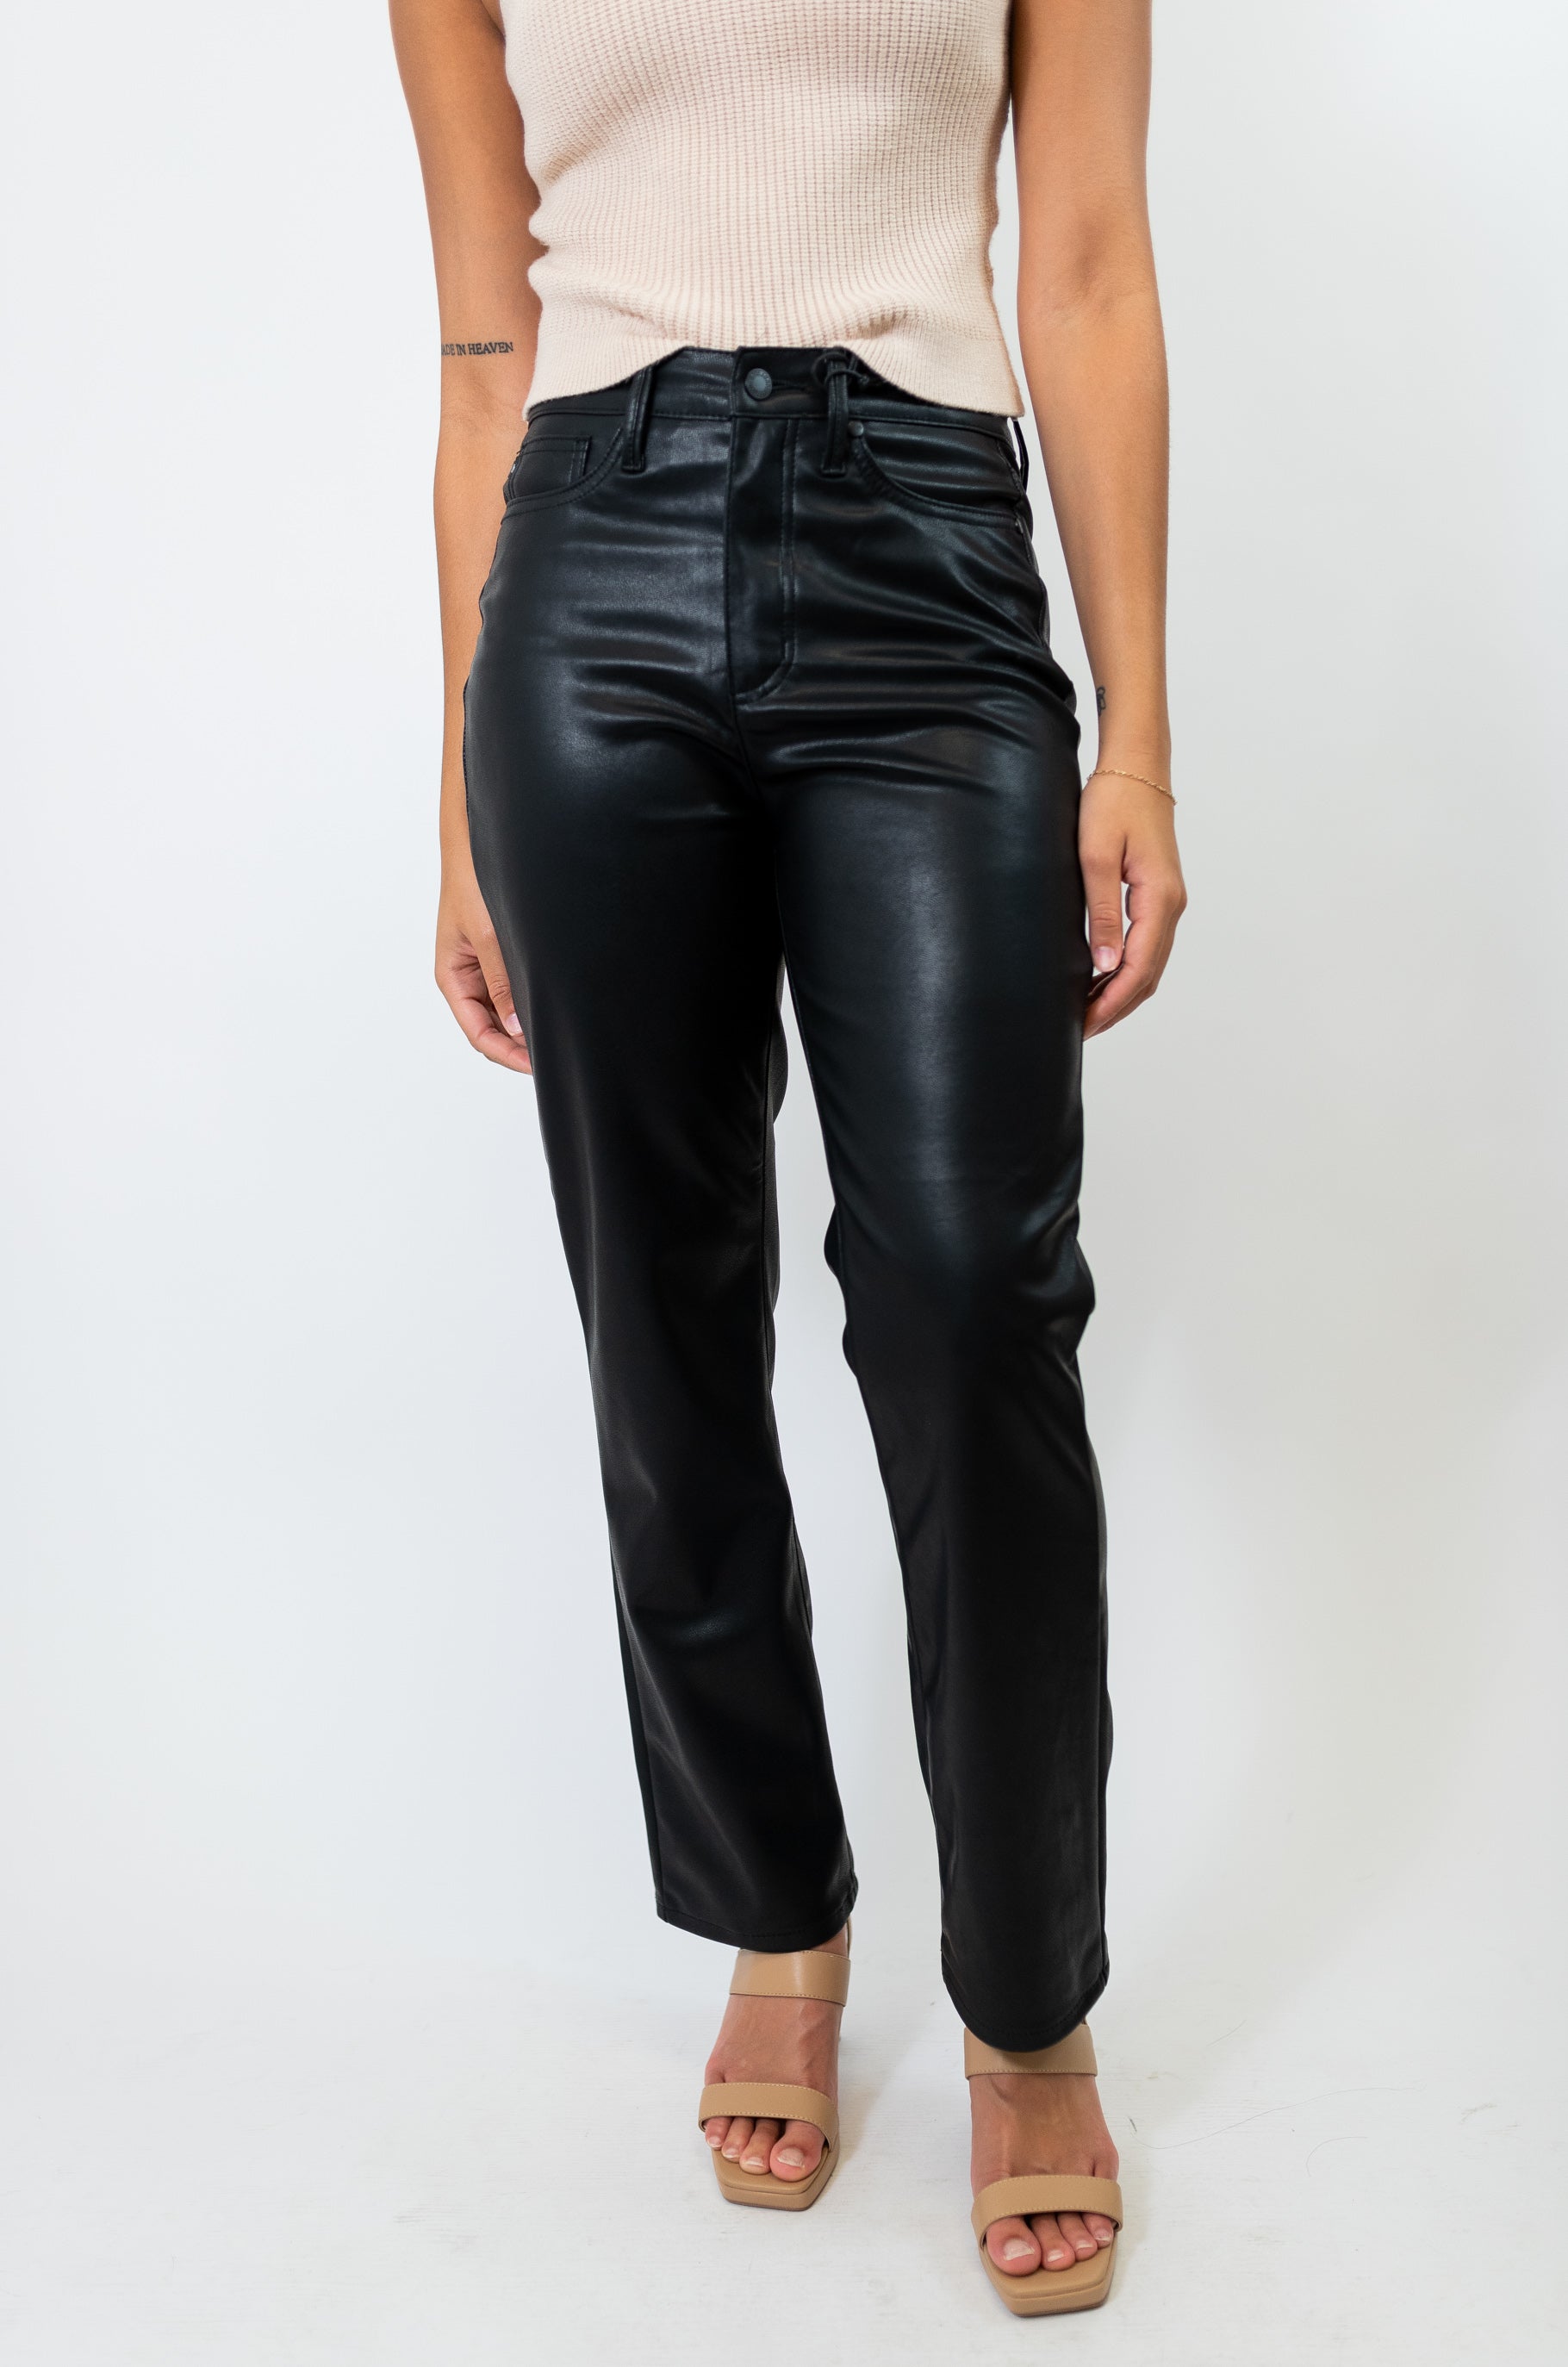 Judy Blue High Waist Tummy Control Faux Leather Straight Pants